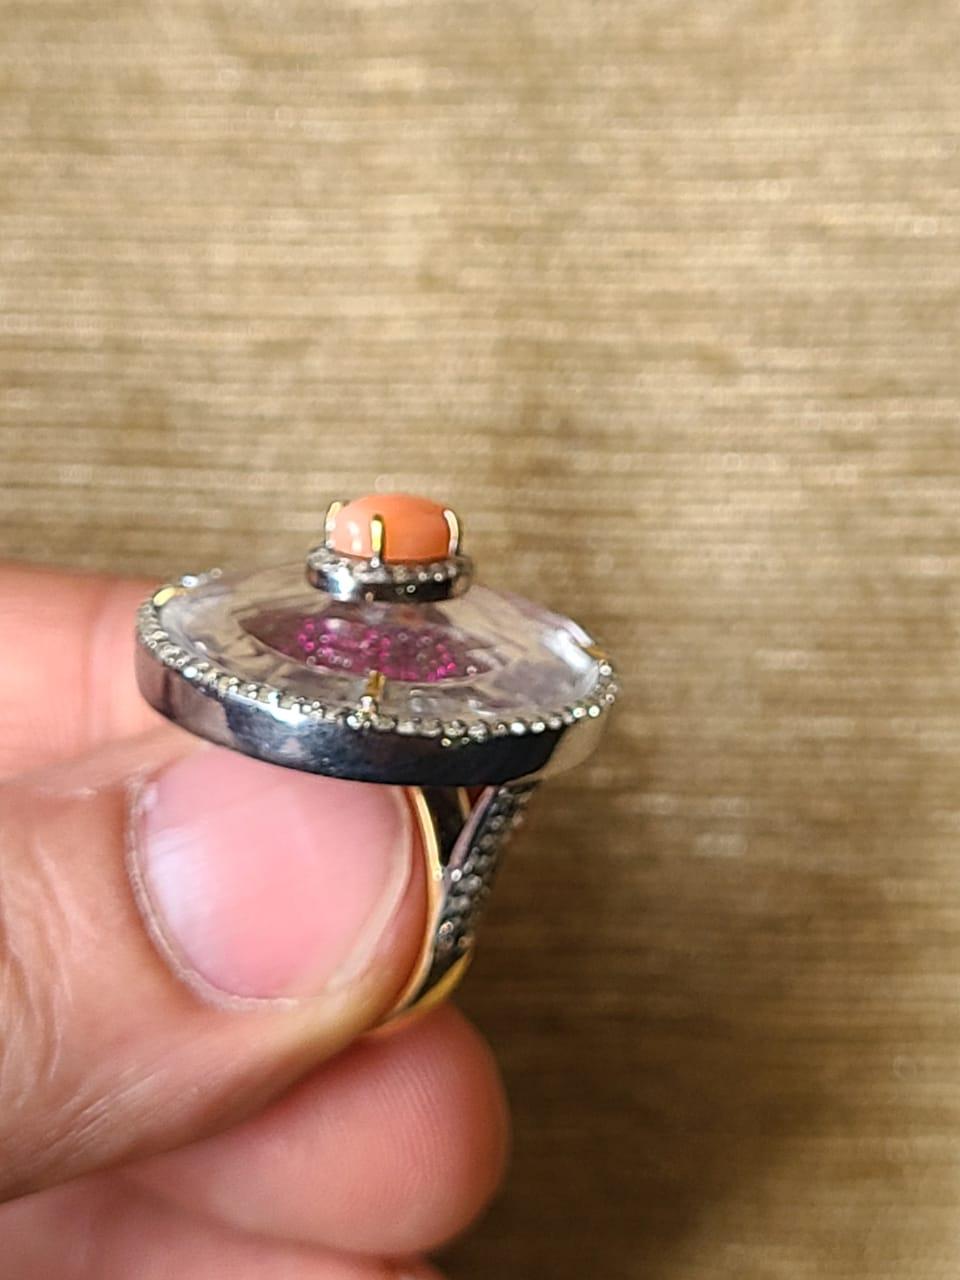 A very gorgeous and beautiful Coral, Crystal & Ruby Victorian style Art Deco Cocktail Ring set in 14k Gold & 925 Silver. The weight of the Coral is 0.80 carats. The weight of the Crystal is 11.53 carats. The weight of the Rubies is 2.67 carats. The